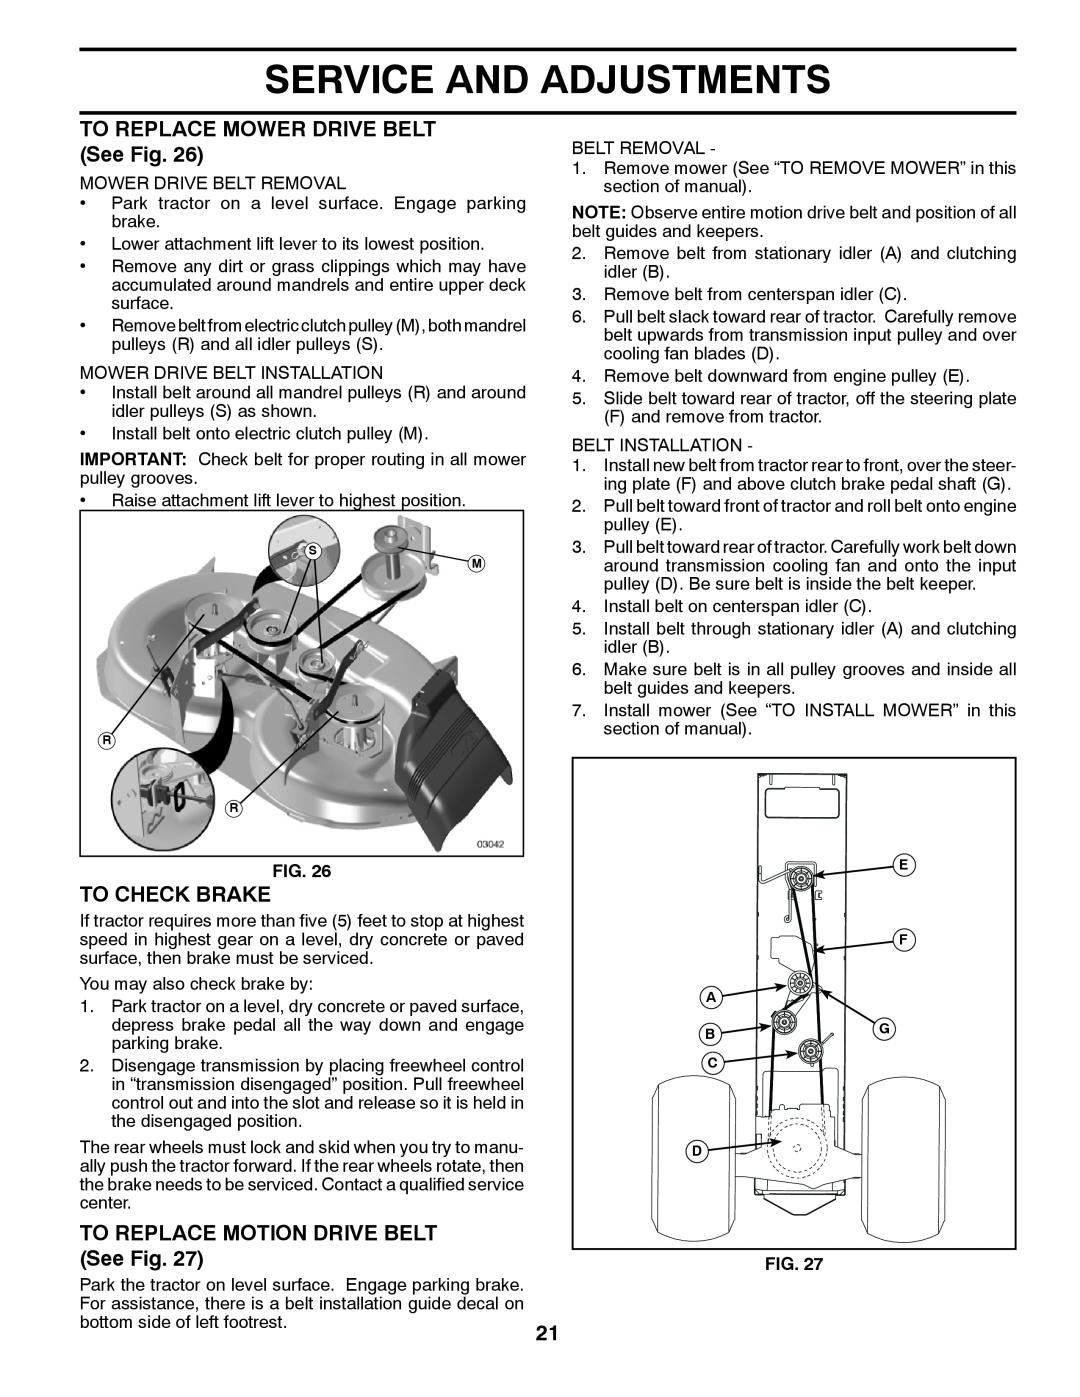 Poulan 412412 TO REPLACE MOWER DRIVE BELT See Fig, To Check Brake, TO REPLACE MOTION DRIVE BELT See Fig, E F A B G C D 